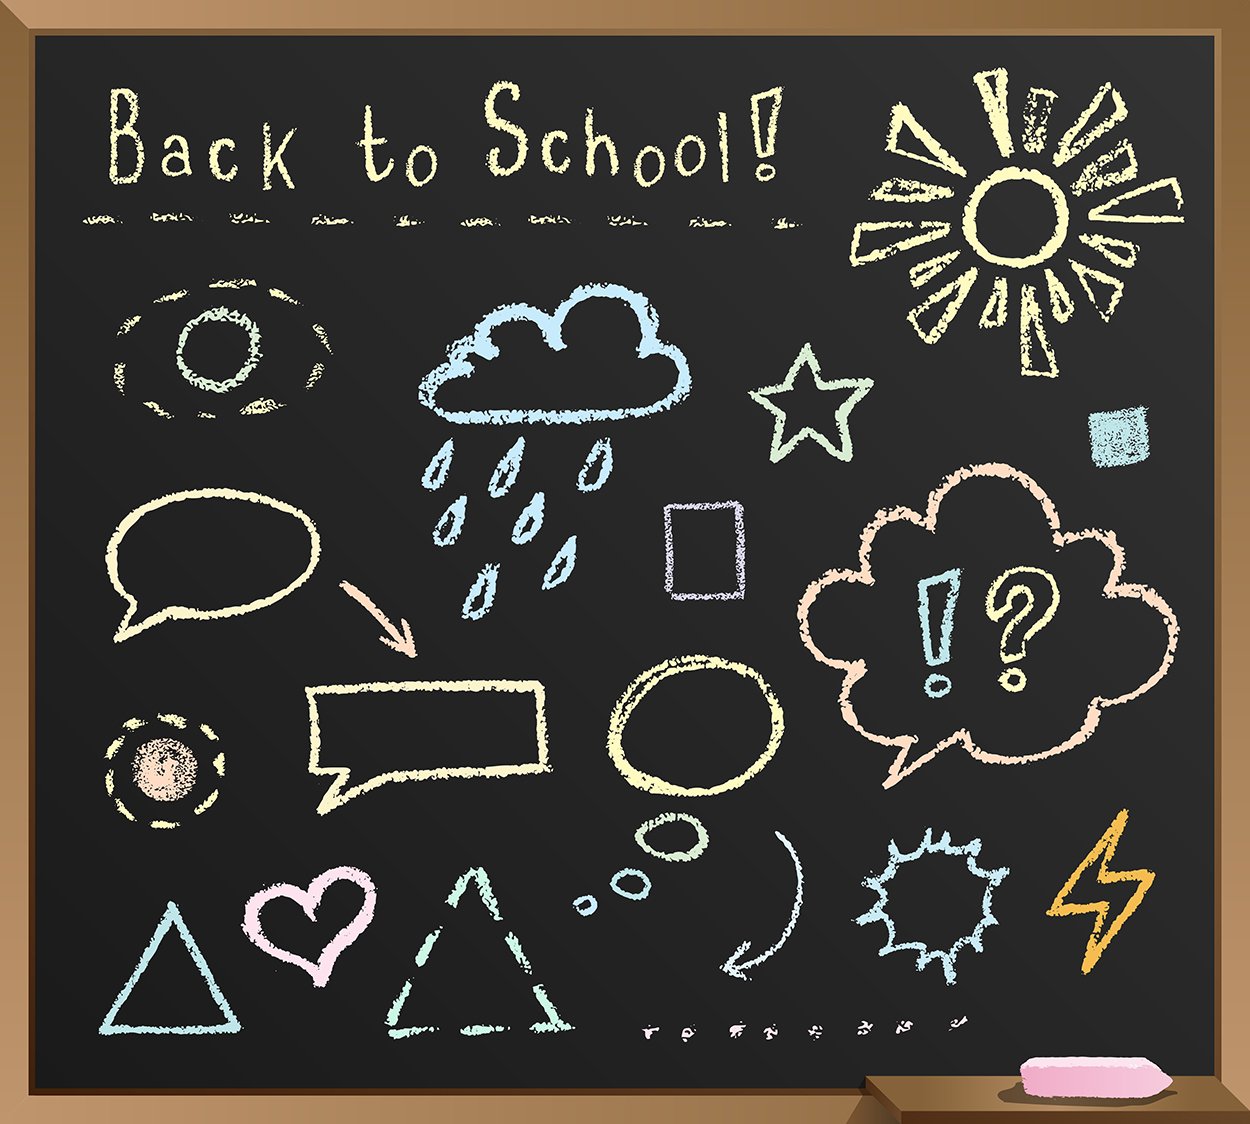 drawn colored chalk on the blackboard the sun. cloud star back to school arrows clouds dialogues question and exclamation mark heart 44